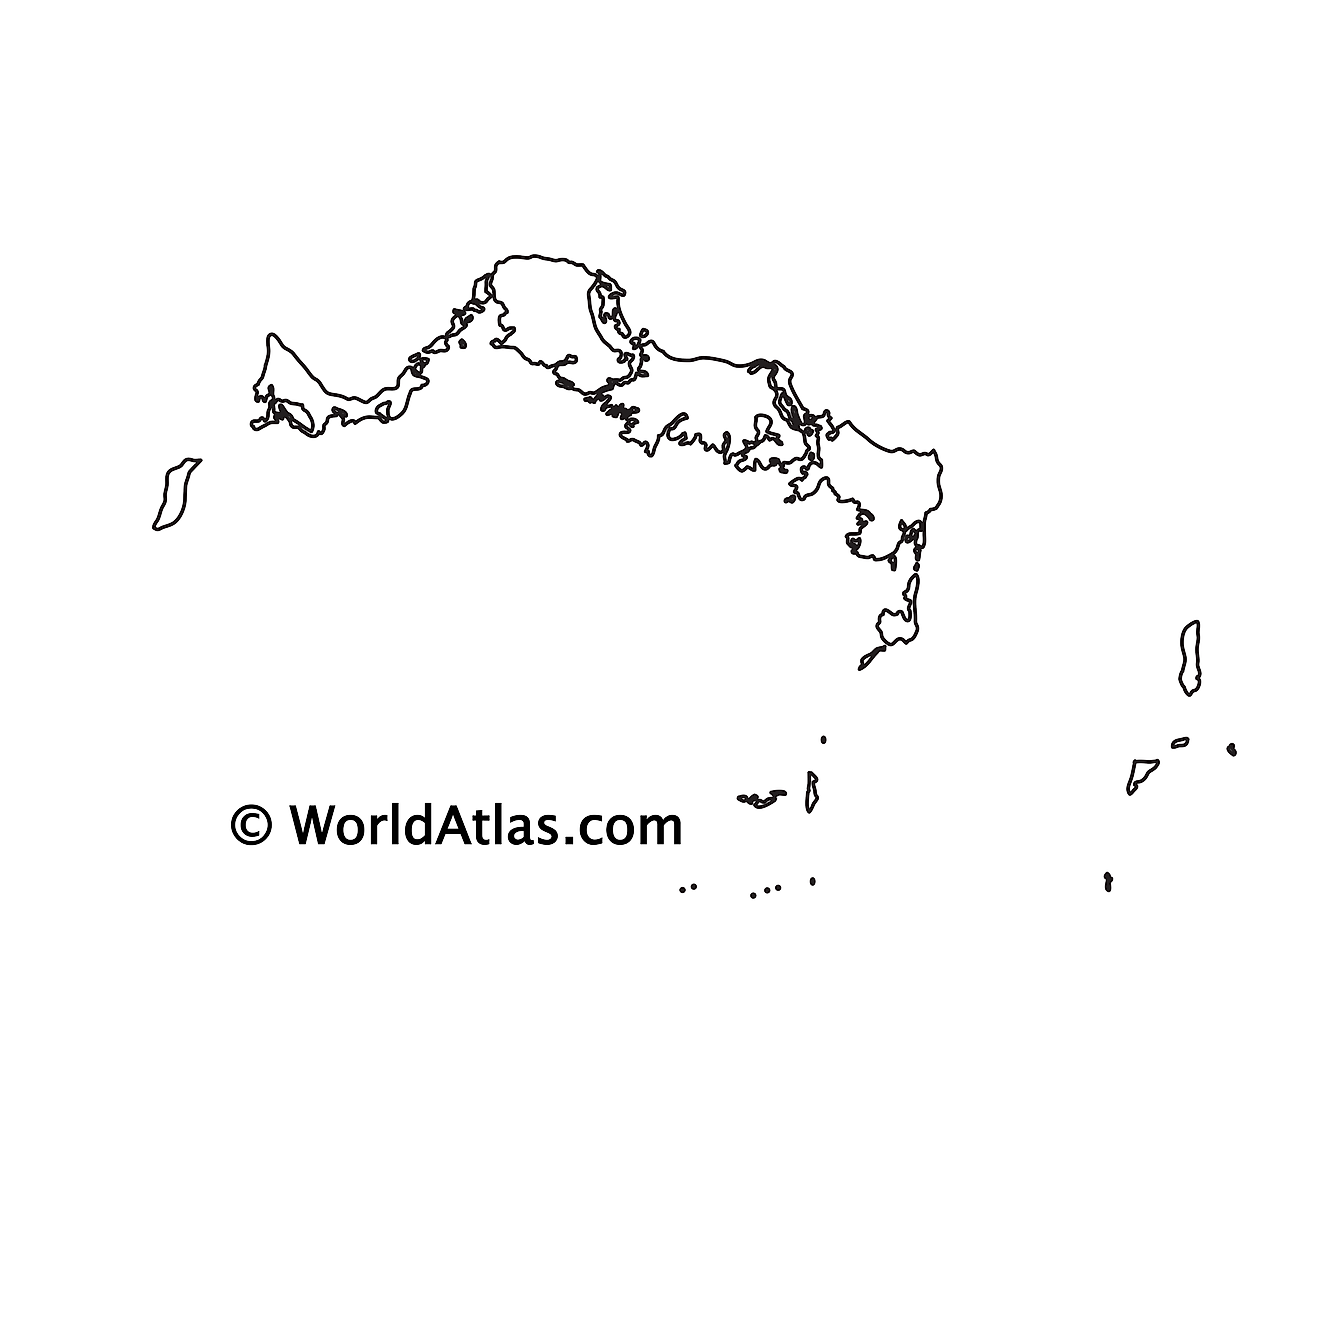 Blank Outline Map of Turks and Caicos